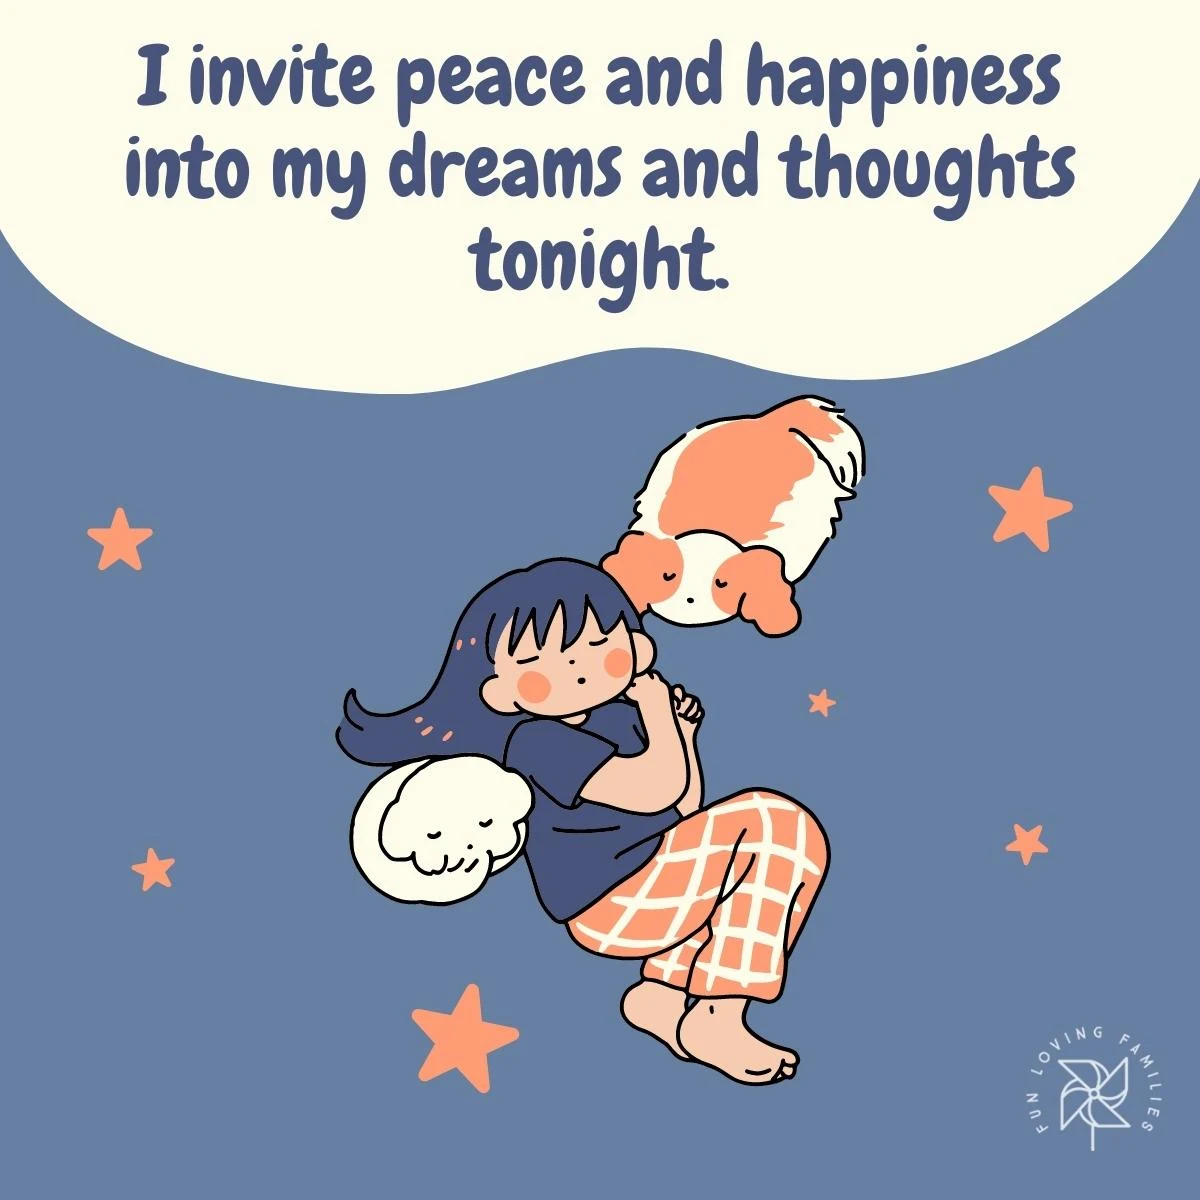 I invite peace and happiness into my dreams and thoughts tonight affirmation